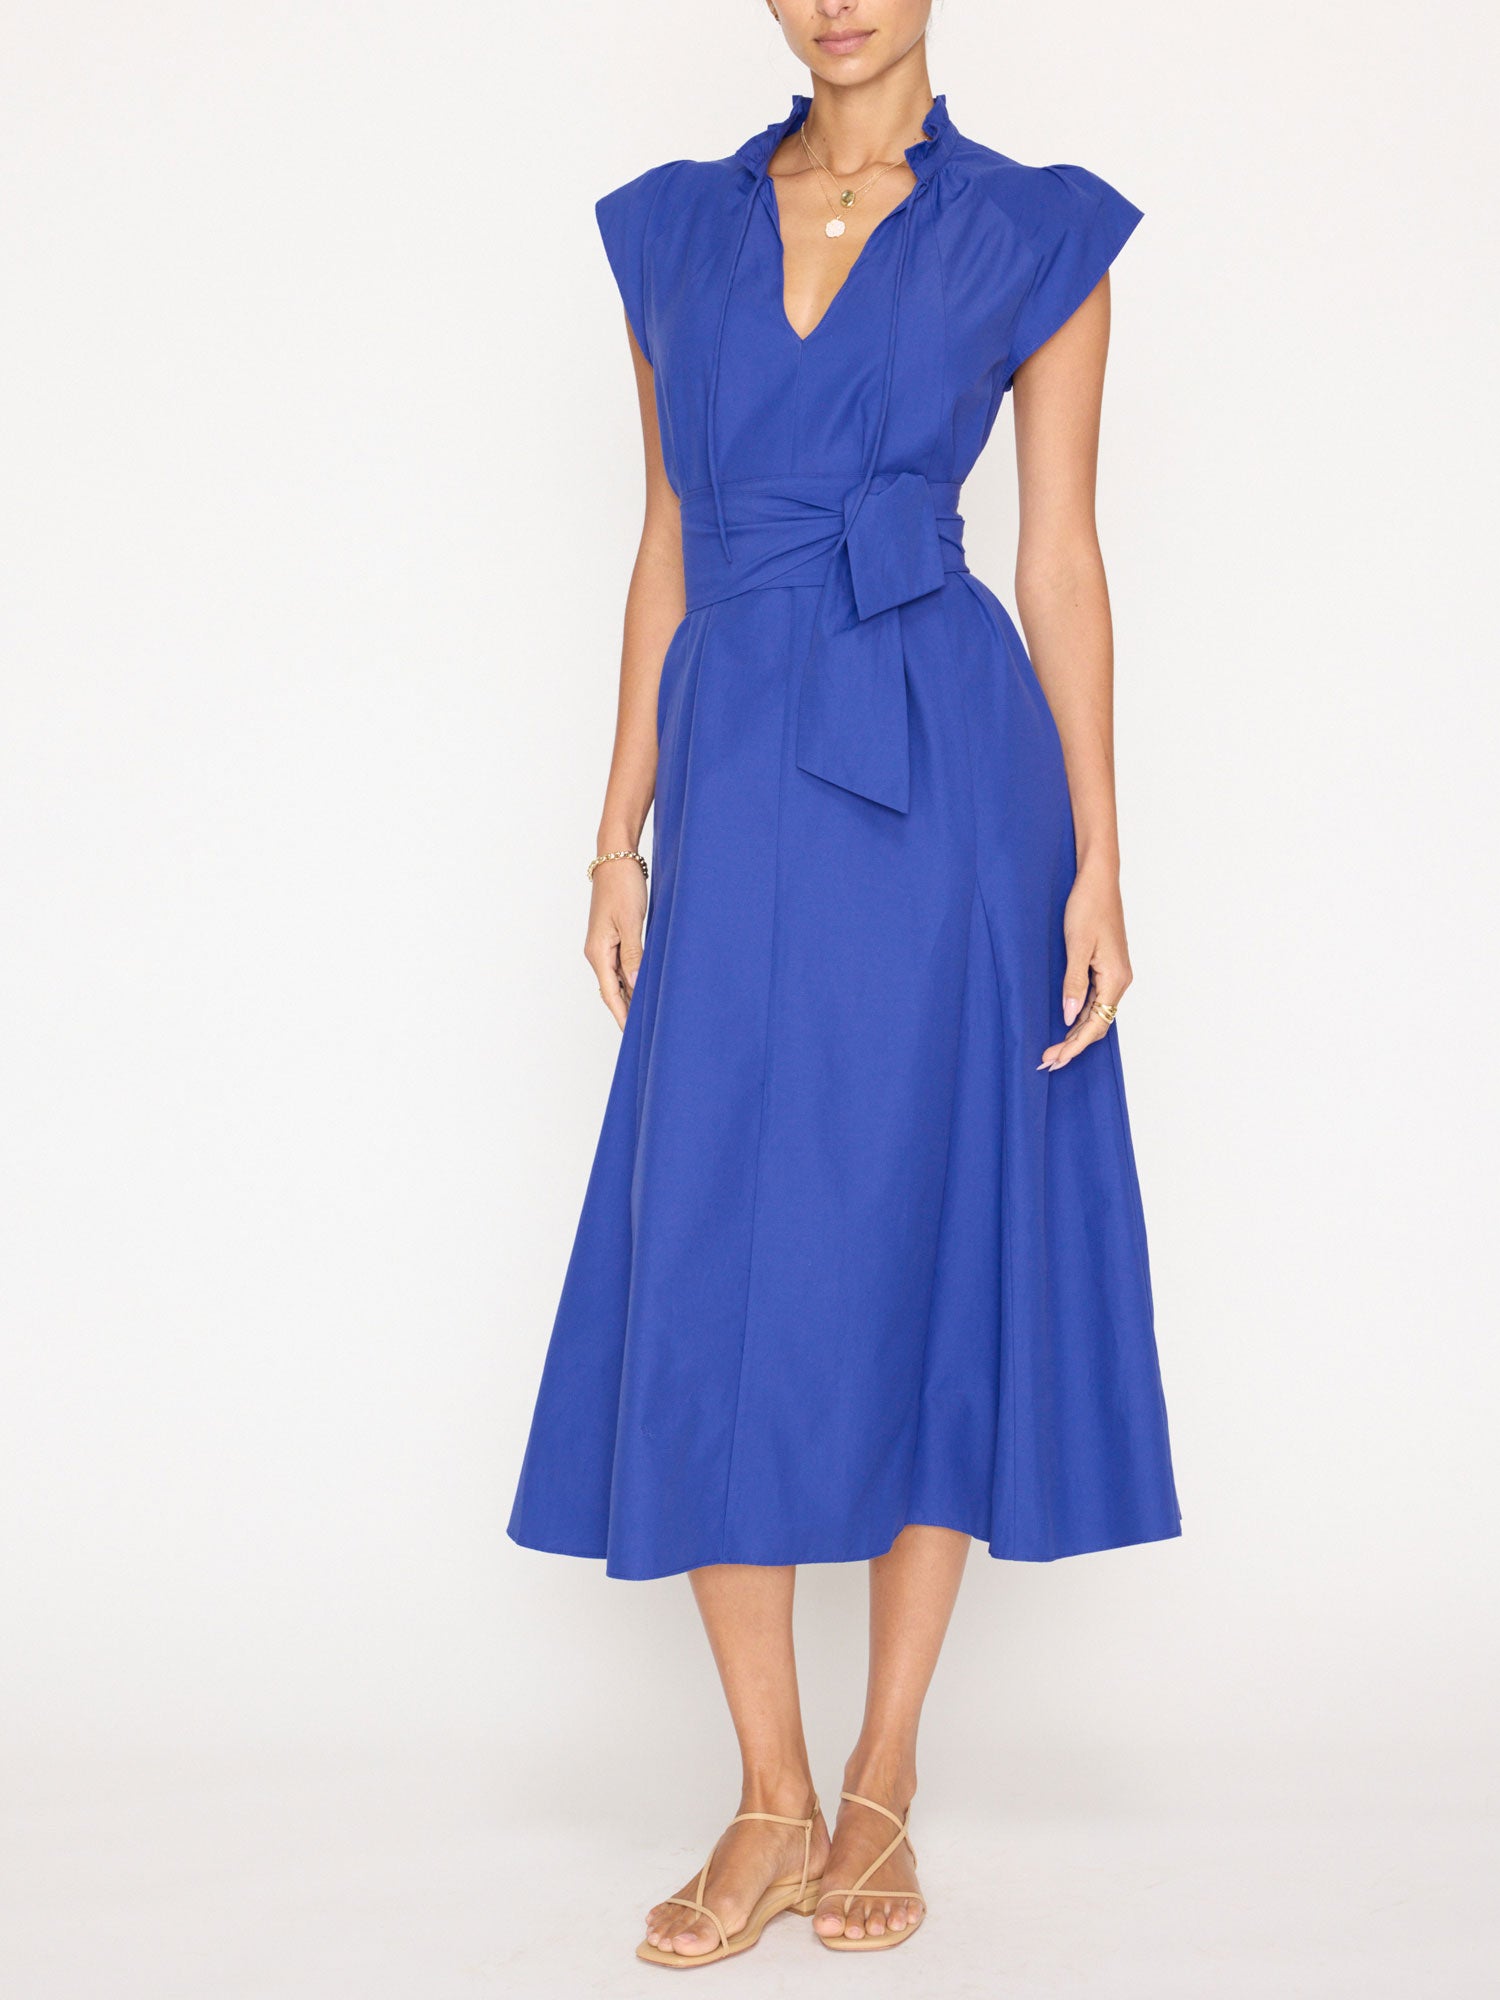 Newport ruffle belted blue midi dress  front view 4